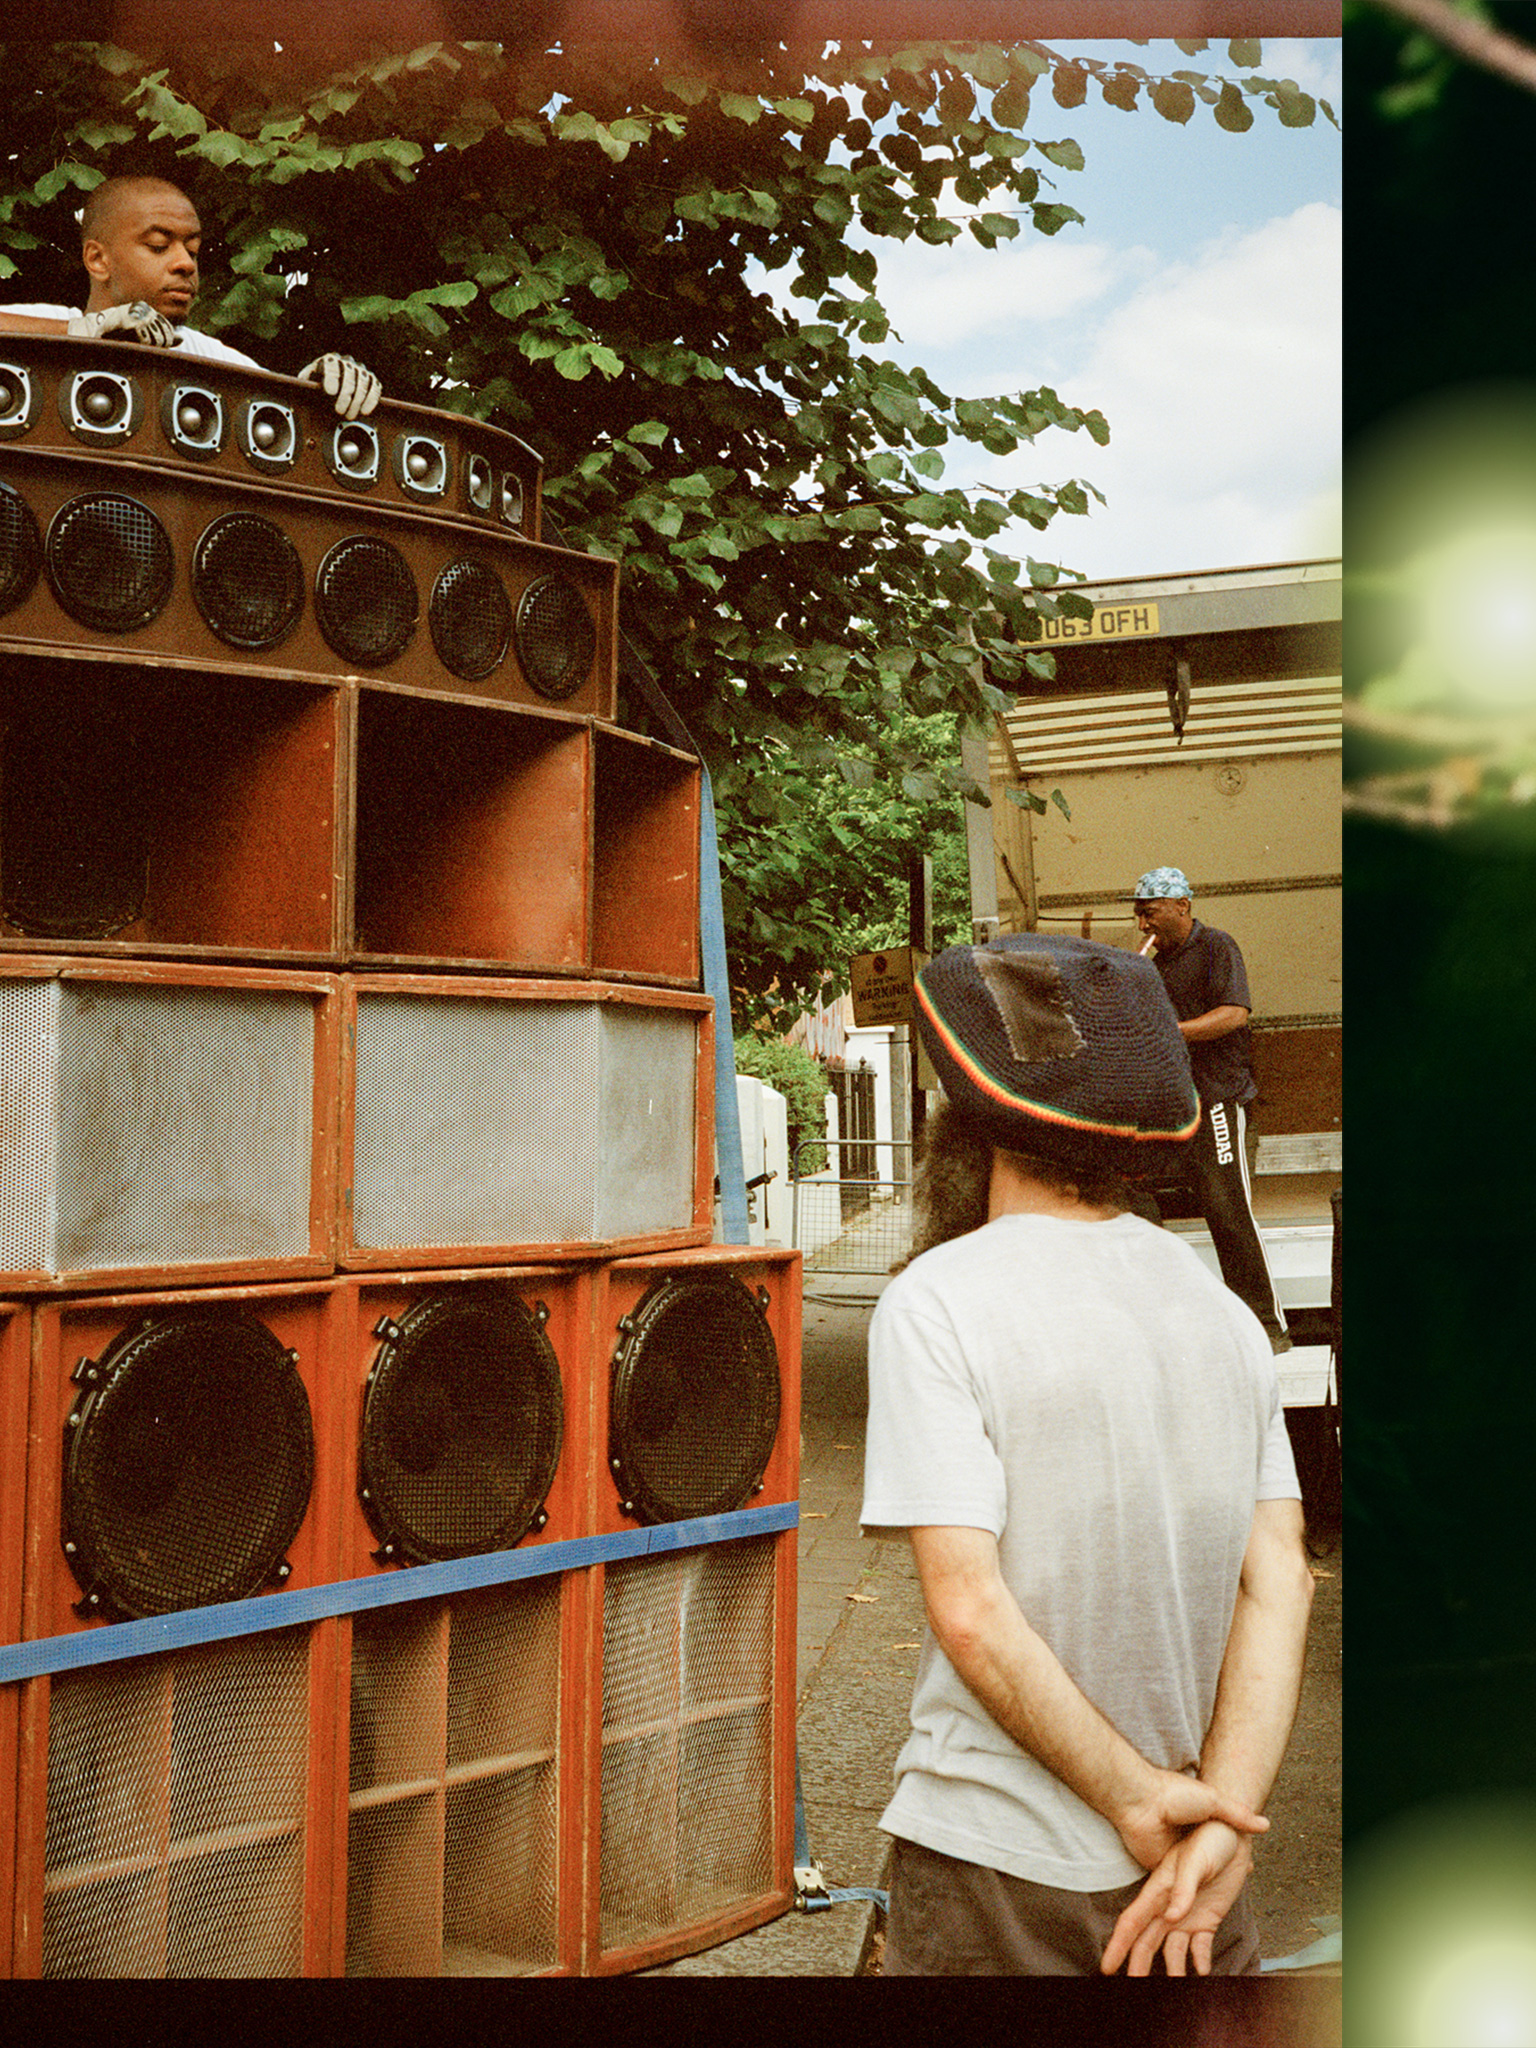 How to Build a Sound System